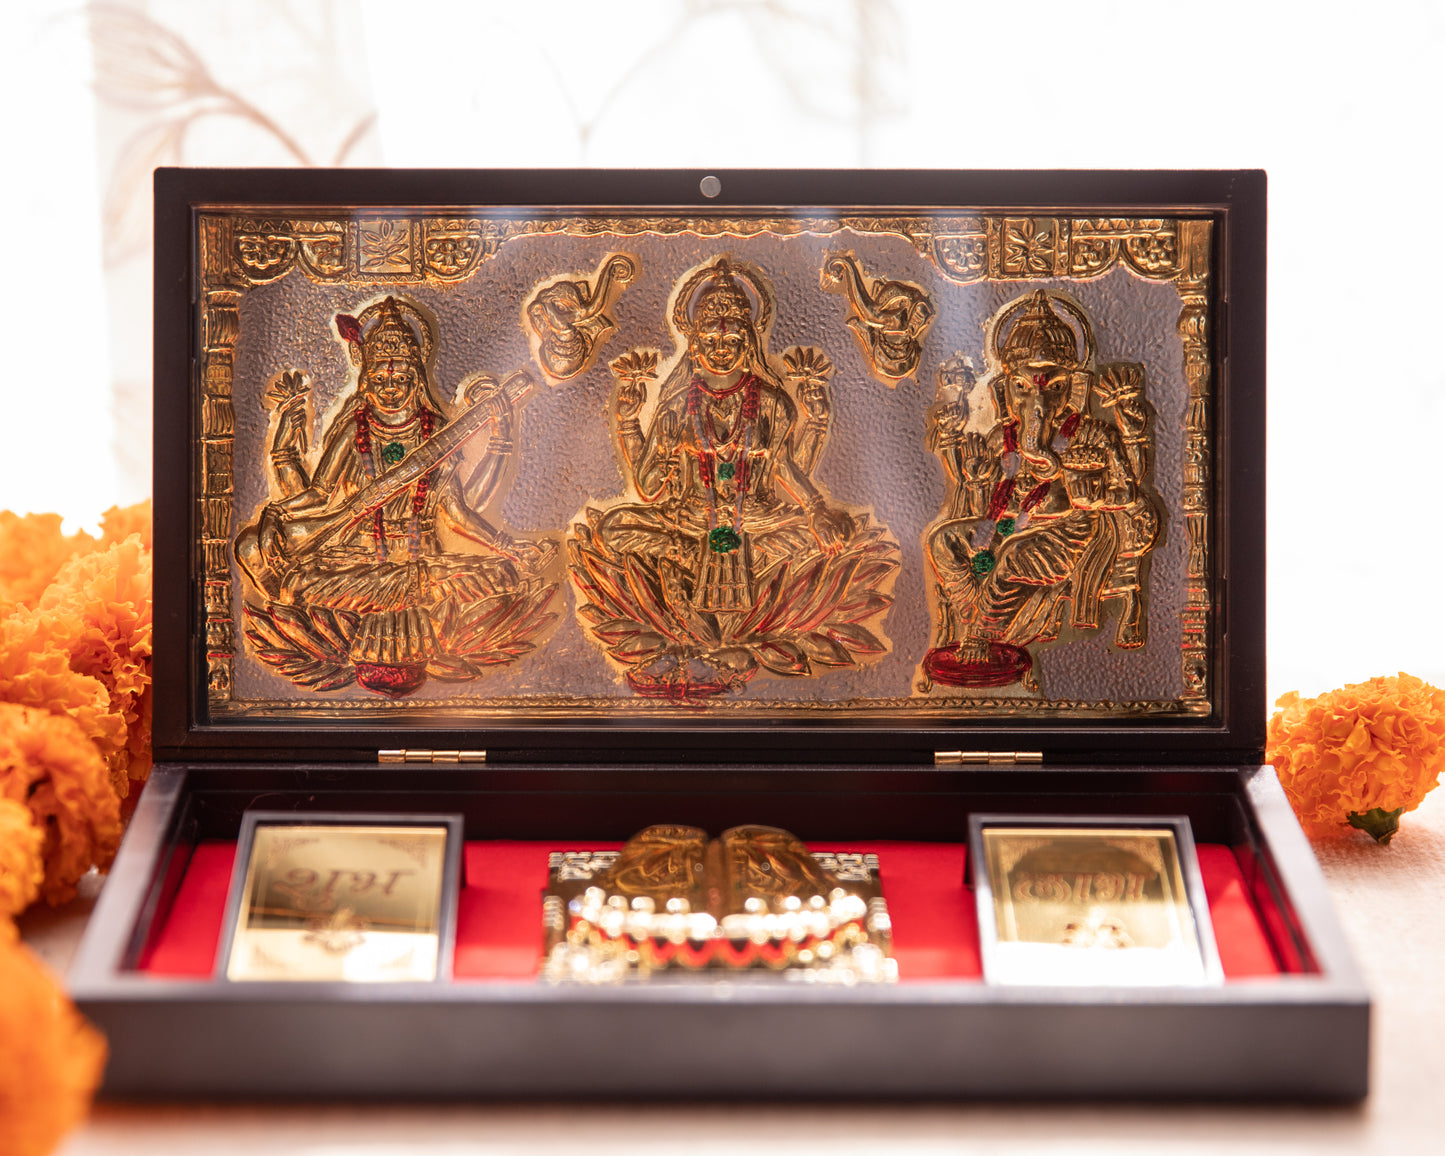 LeelaTheStore’s divine 24K Laxmi, Ganesh, and Saraswati Pooja Box, the 3 idols have been engraved onto the top half of the box and have been finely wrapped in gold foil.